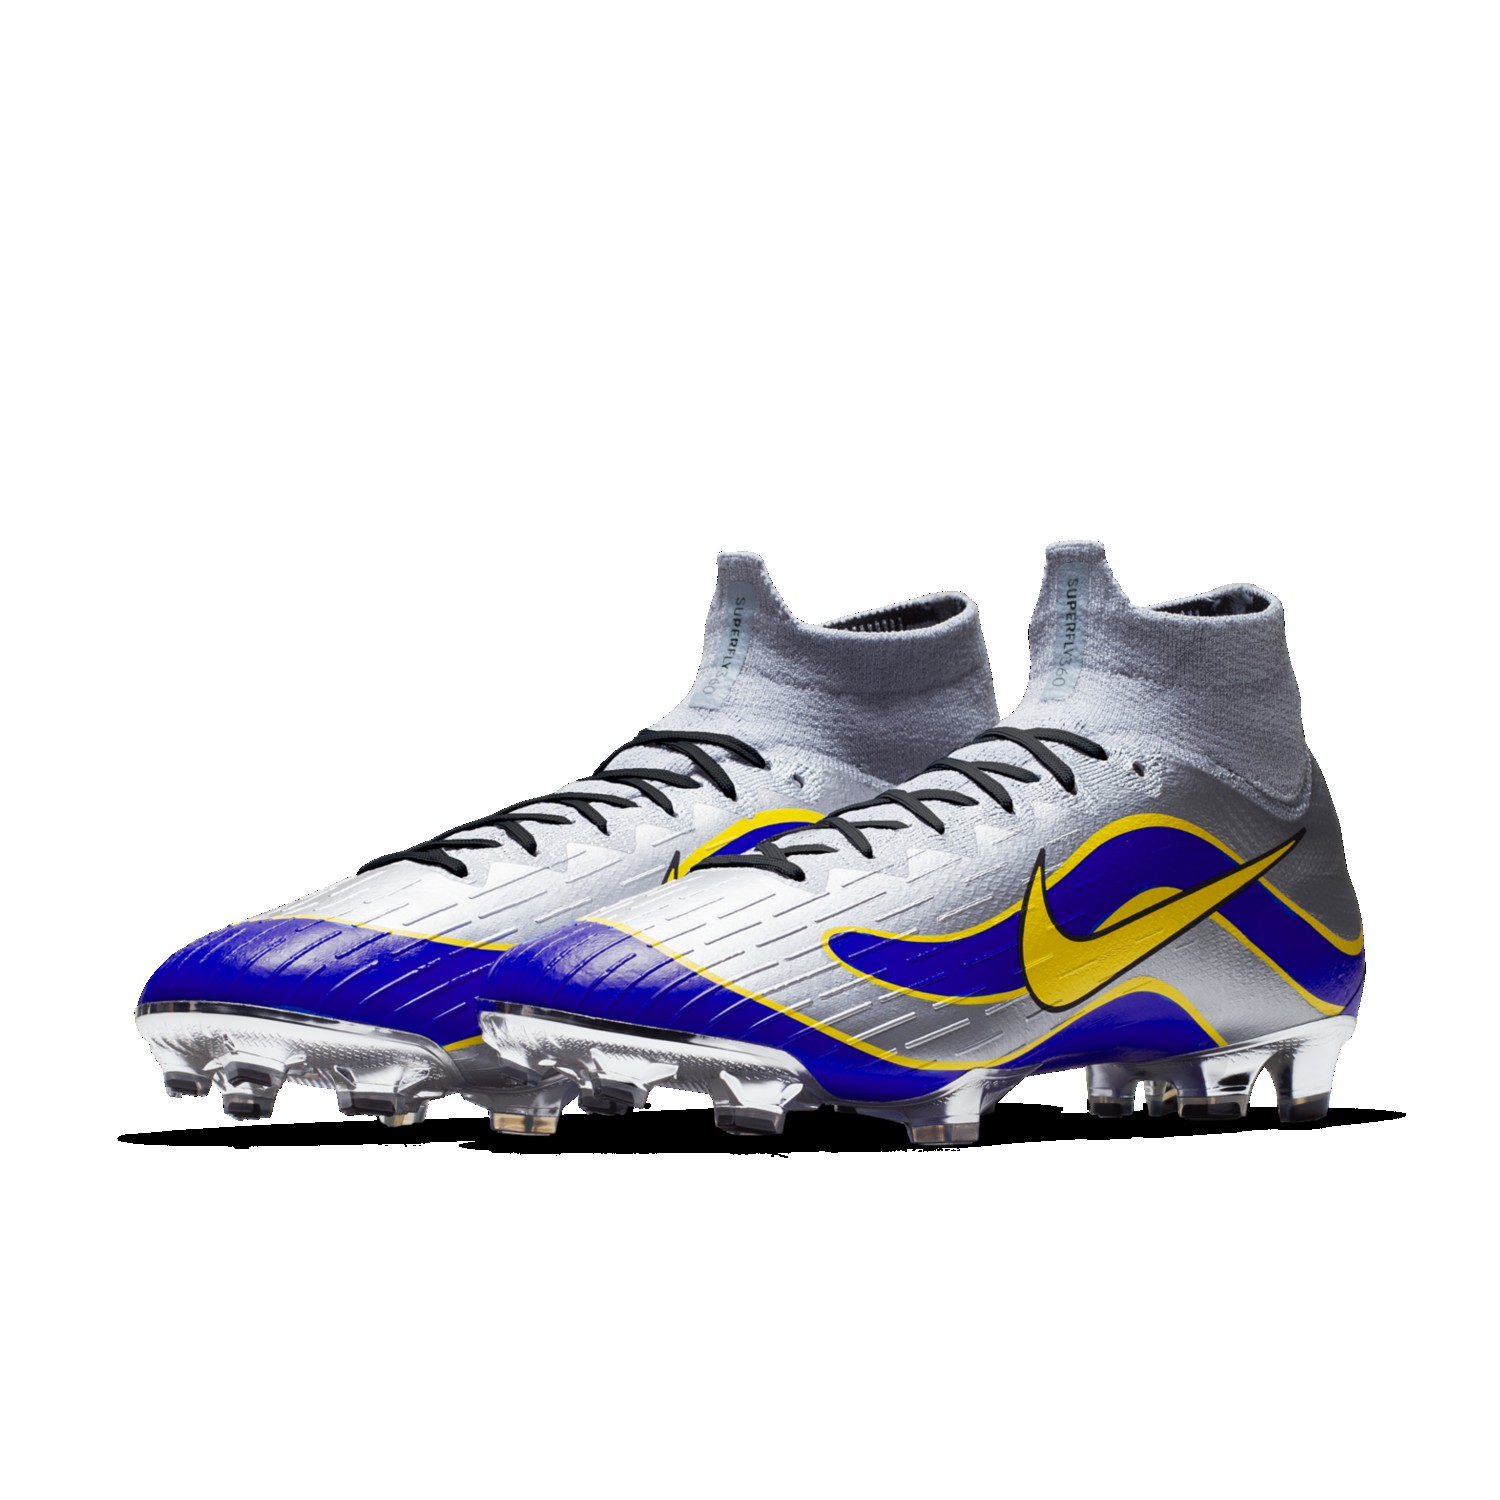 Nike Mercurial Superfly 360 Elite 1998 iD Football Boots - Football Shirt  Culture - Latest Football Kit News and More